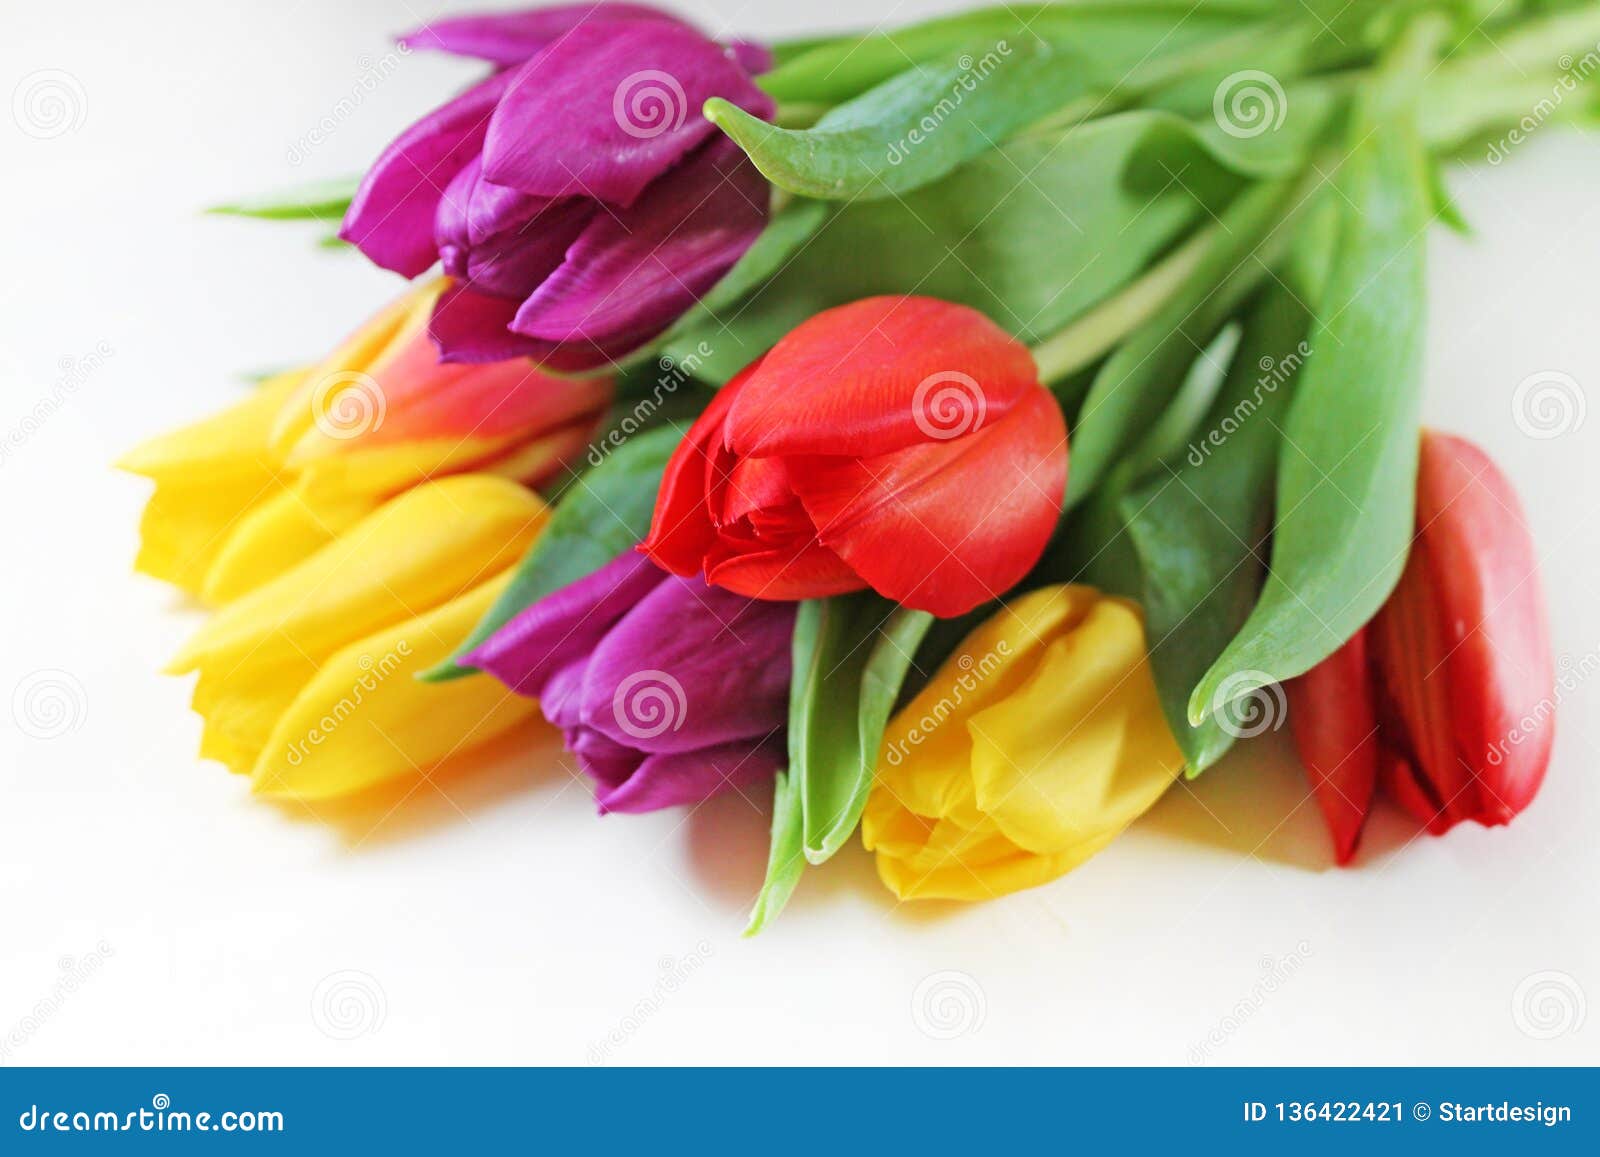 Bouquet of Fresh Multicolor Tulips Close-up. Stock Image - Image of ...